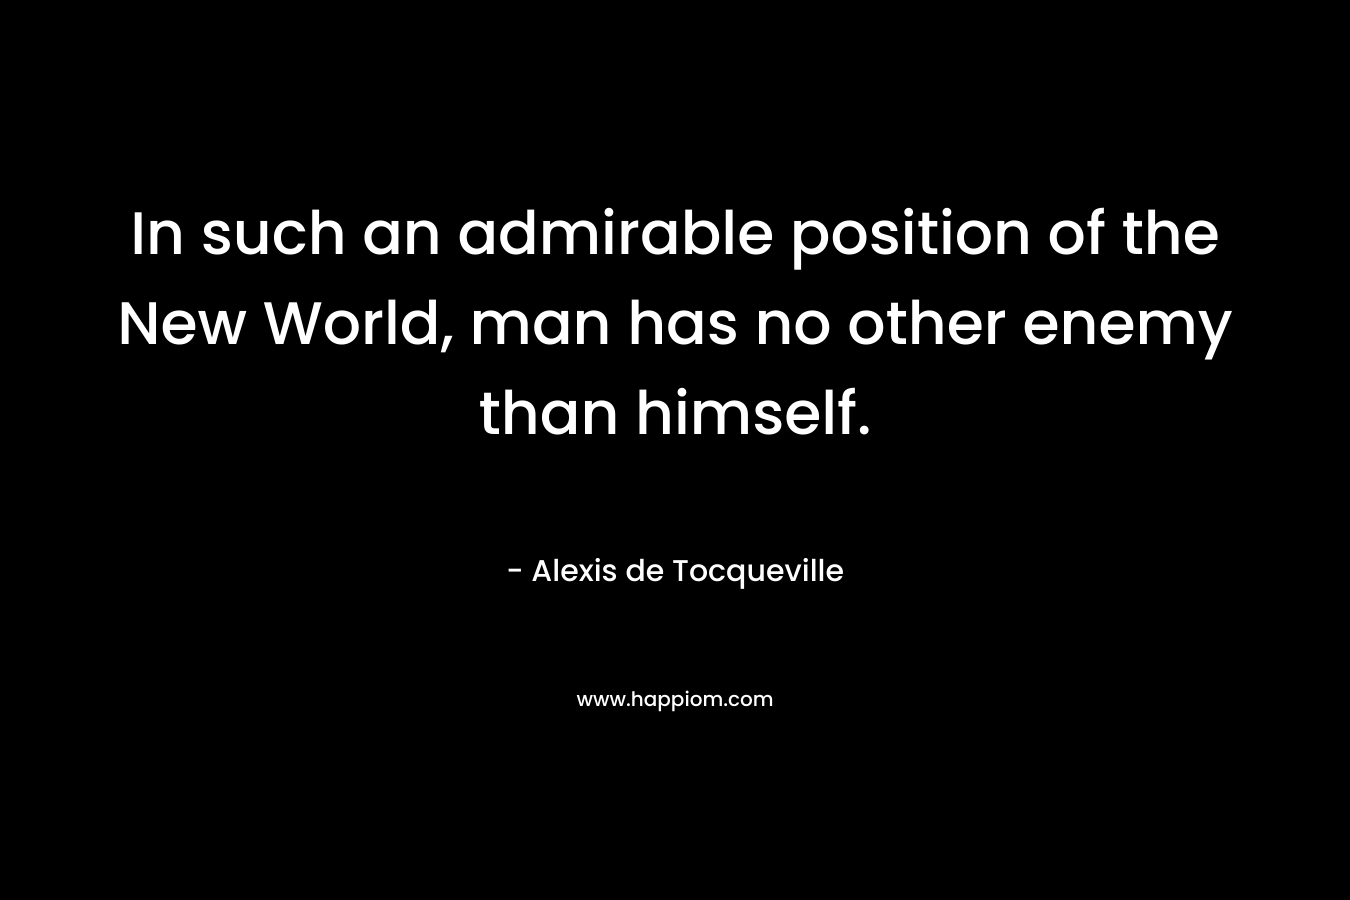 In such an admirable position of the New World, man has no other enemy than himself. – Alexis de Tocqueville